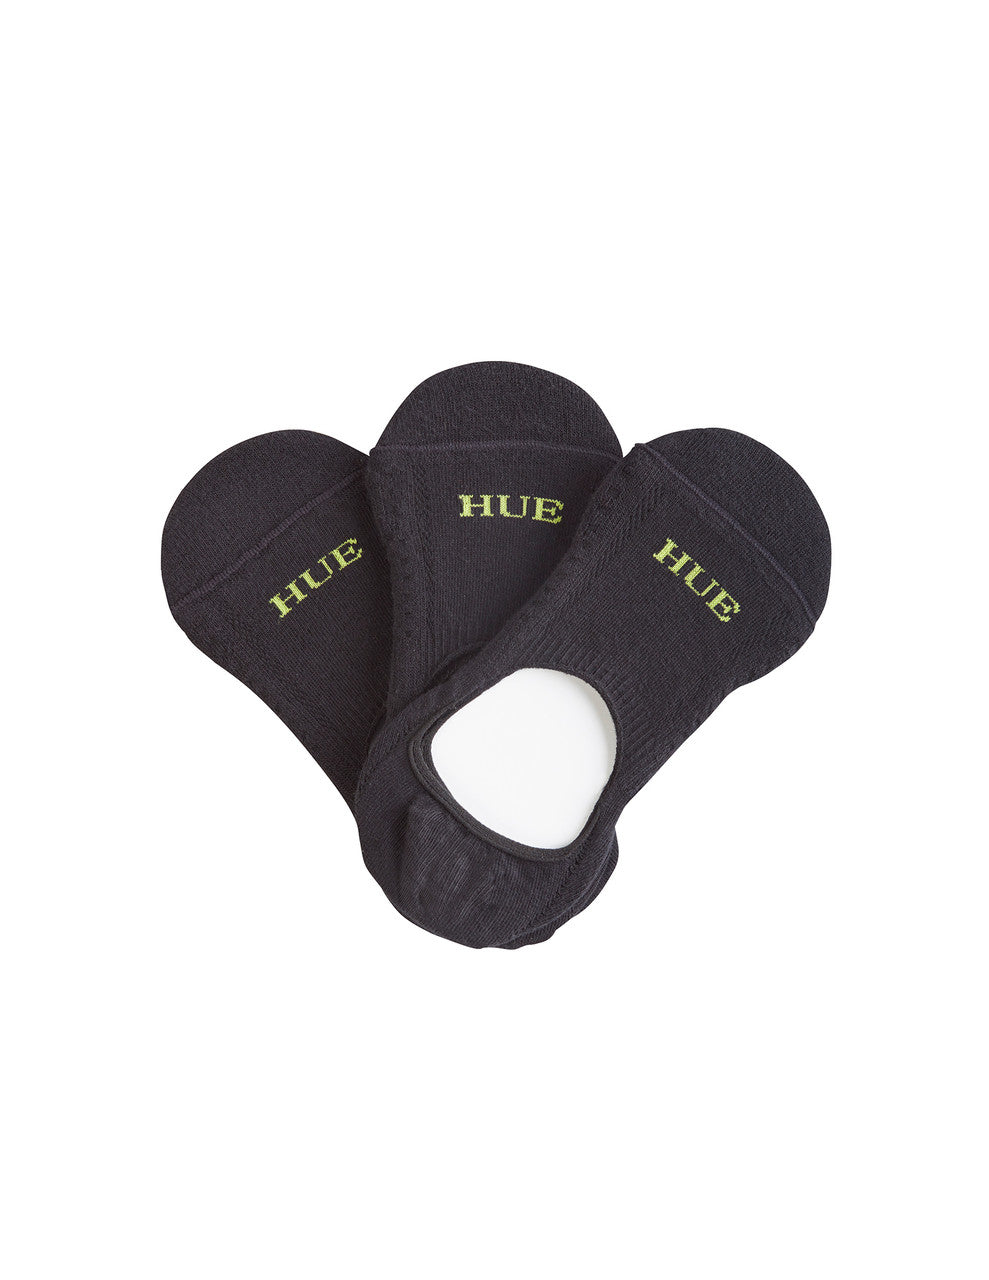 Hue Air Cushion Liner - 3 Pack Black One size